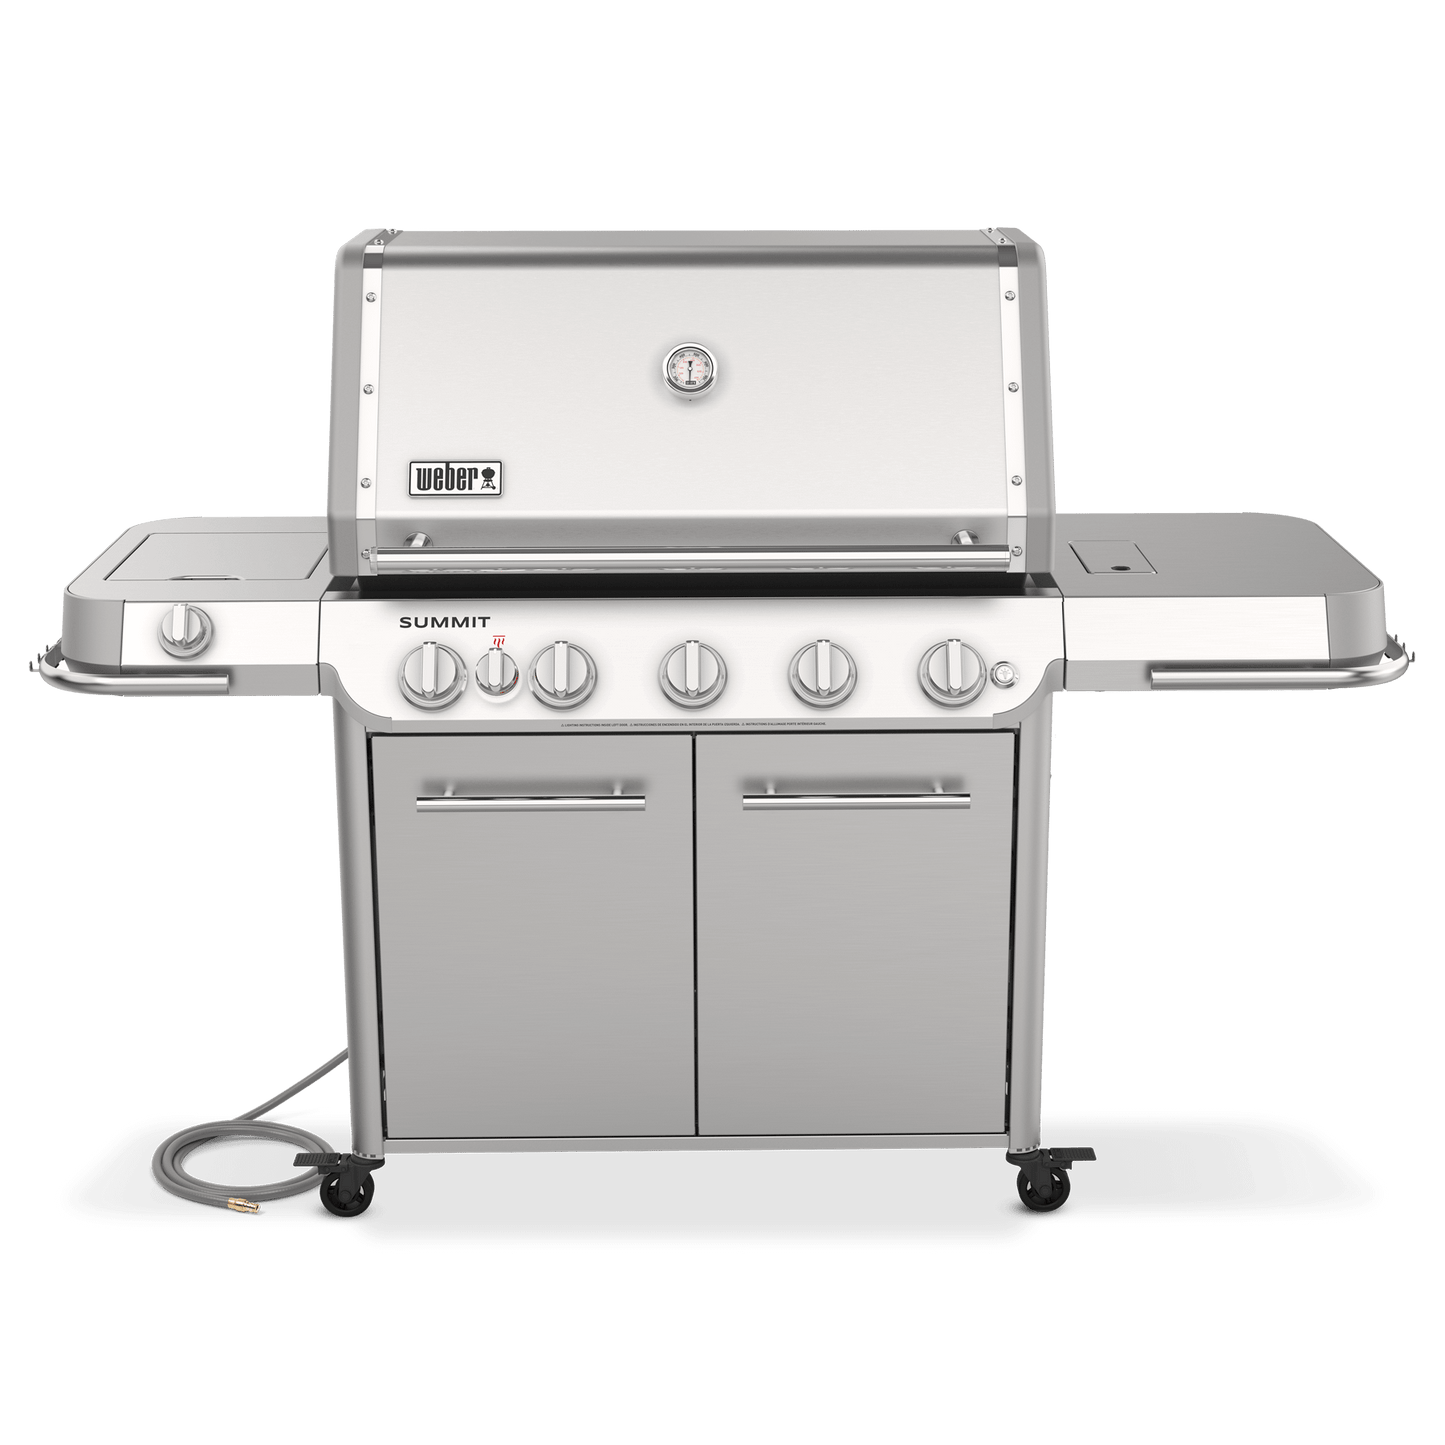 Weber 1500041 Summit® Fs38 S Gas Grill (Natural Gas) - Stainless Steel